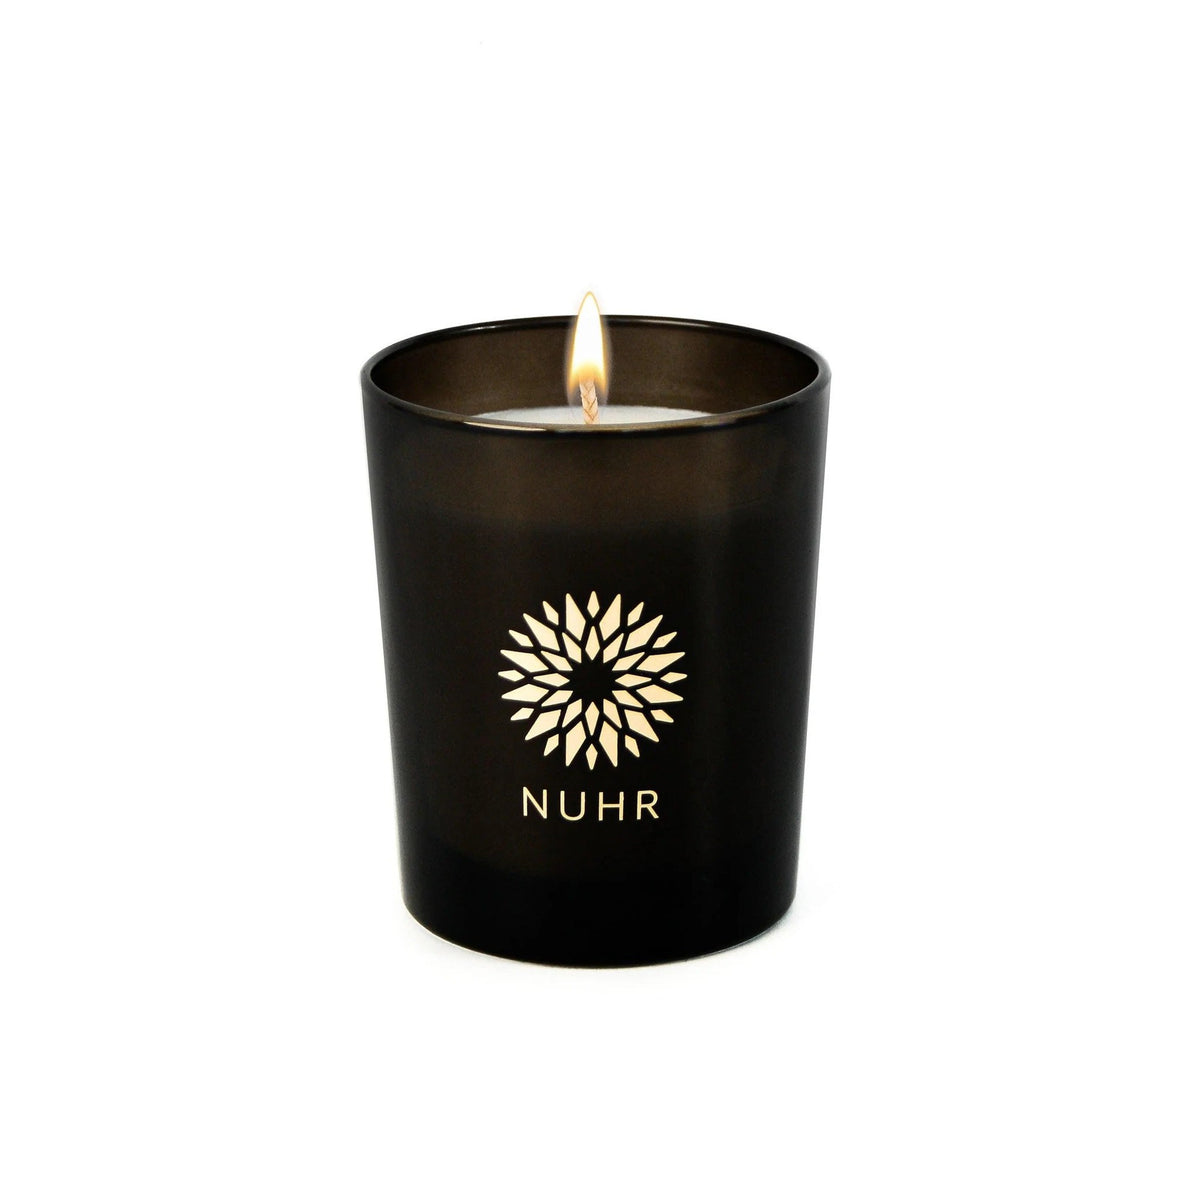 Nuhr Amber And Oud Classic Candle